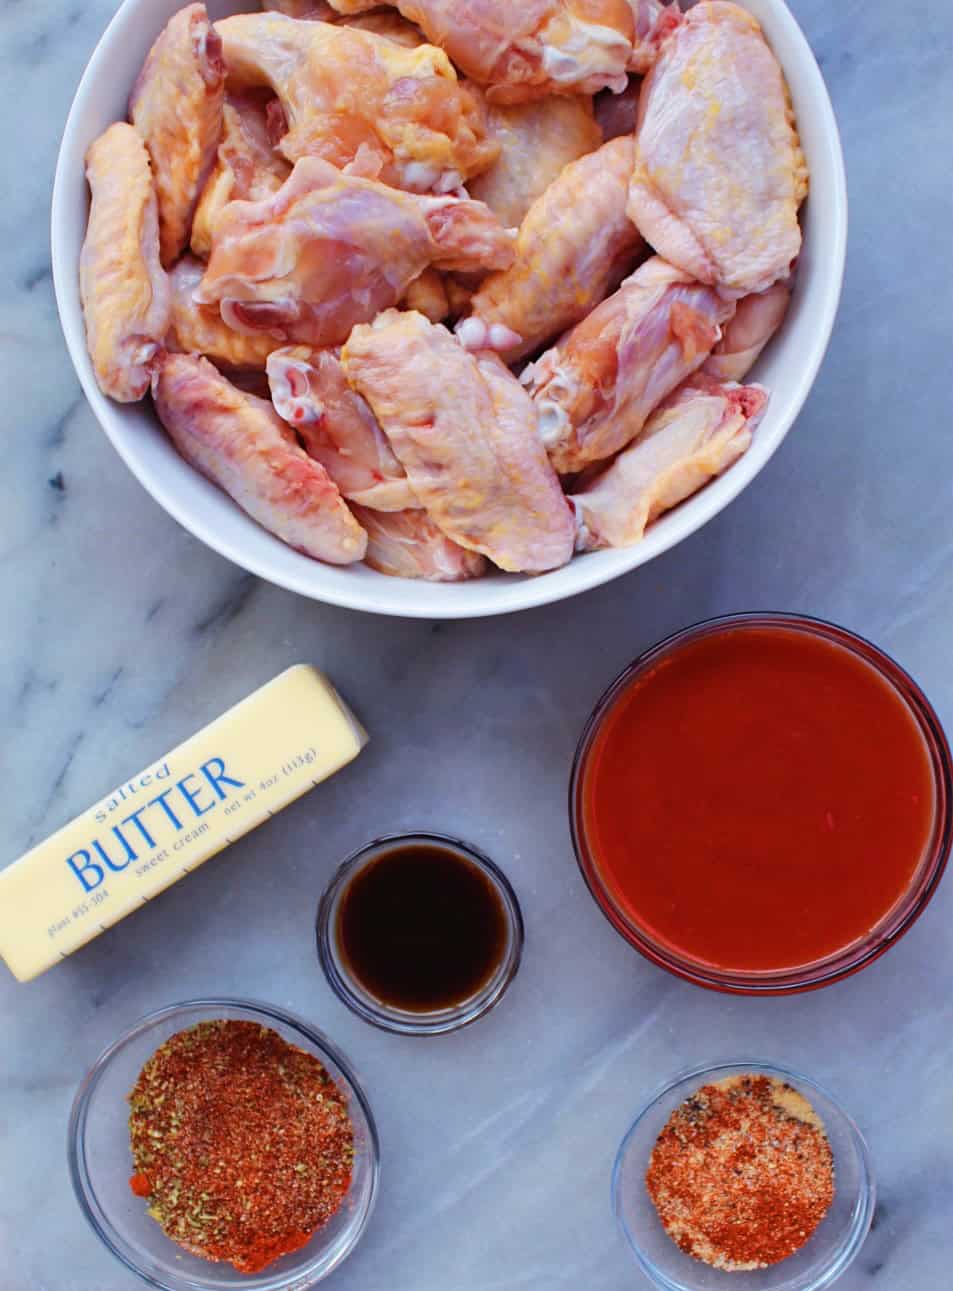 Separate bowls containing raw party wings, Frank's Red Hot sauce, Worcestershire sauce, spicy seasoning, and butter on a marble counter.